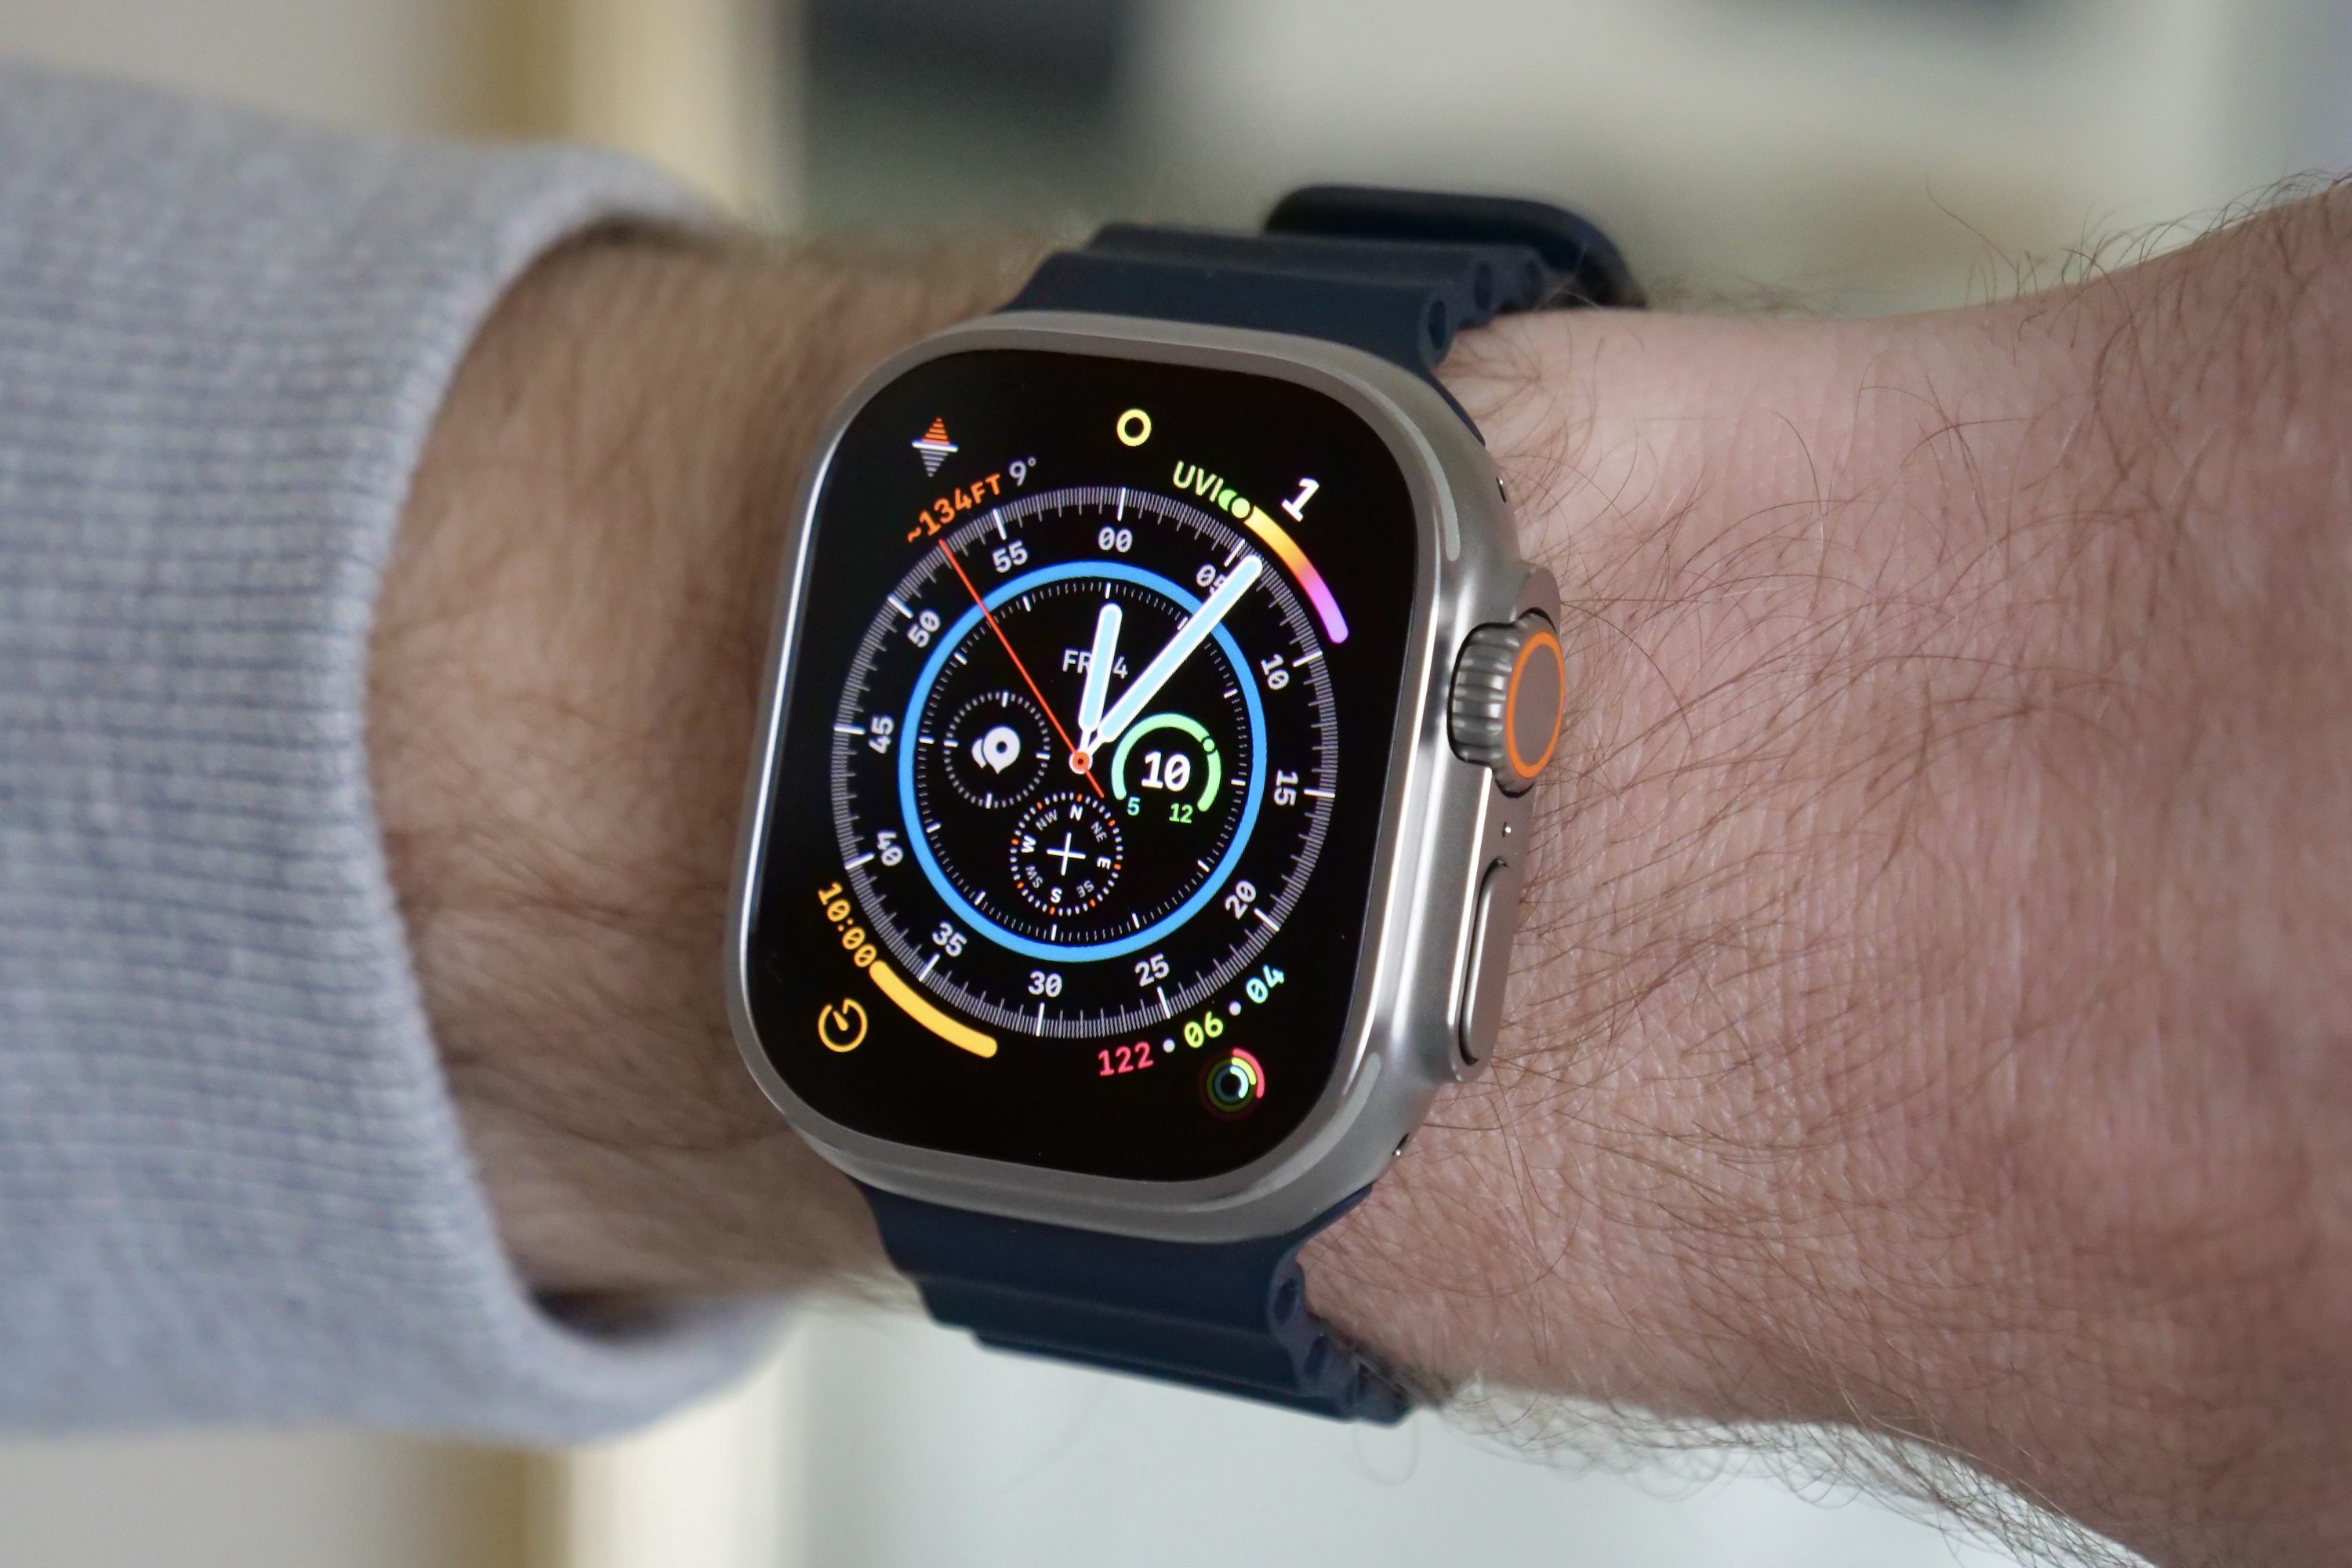 Does The Samsung Galaxy Watch 5 Need A Screen Protector?